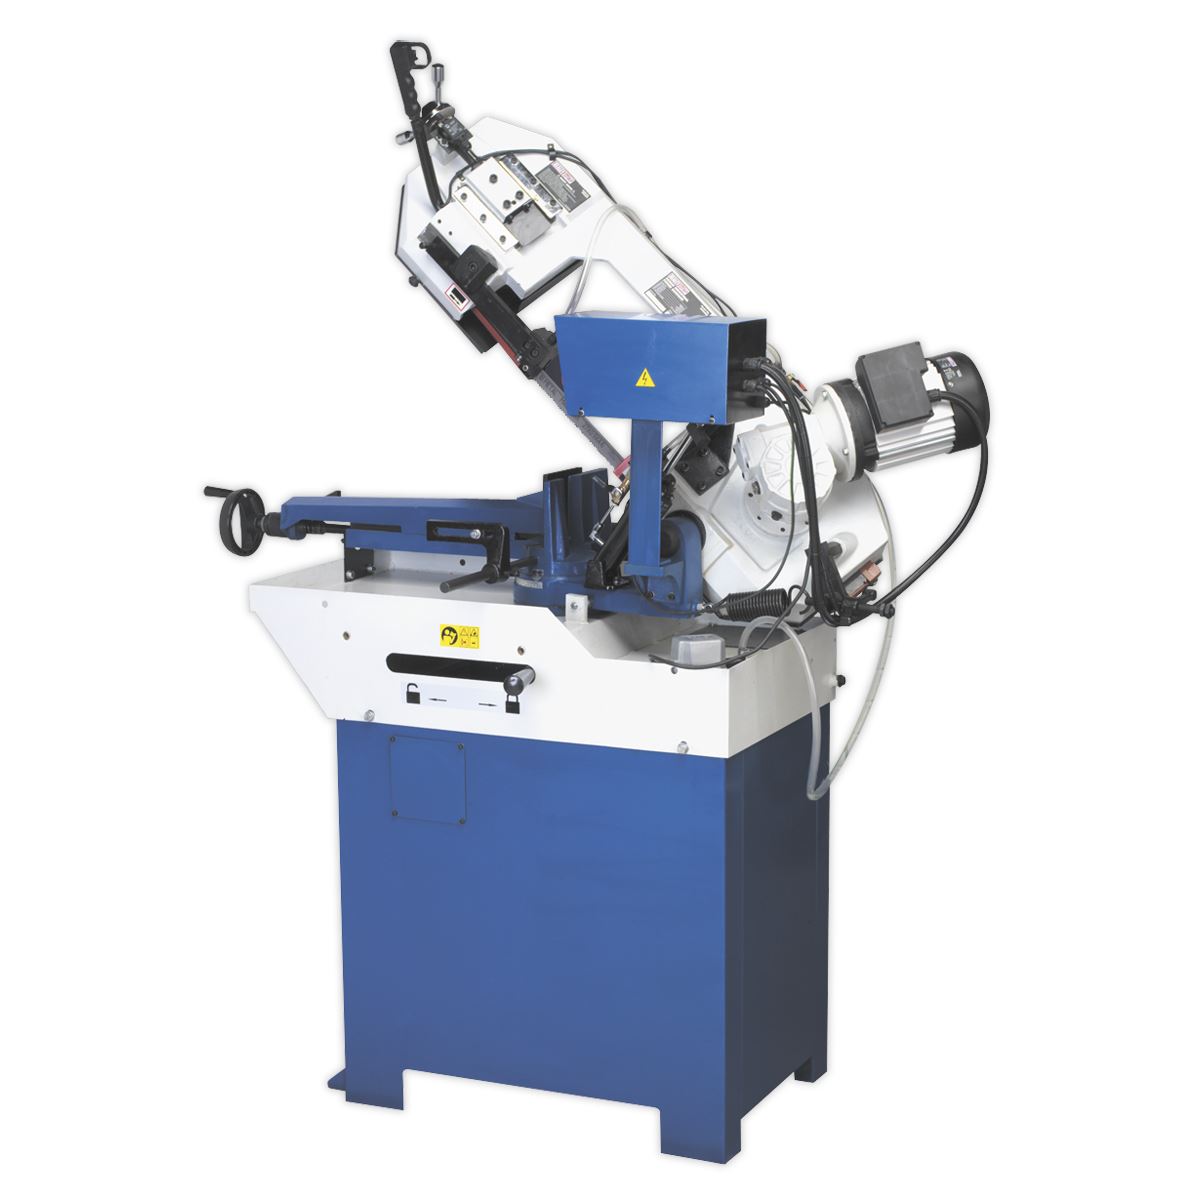 Sealey Industrial Power Bandsaw 255mm SM355CE